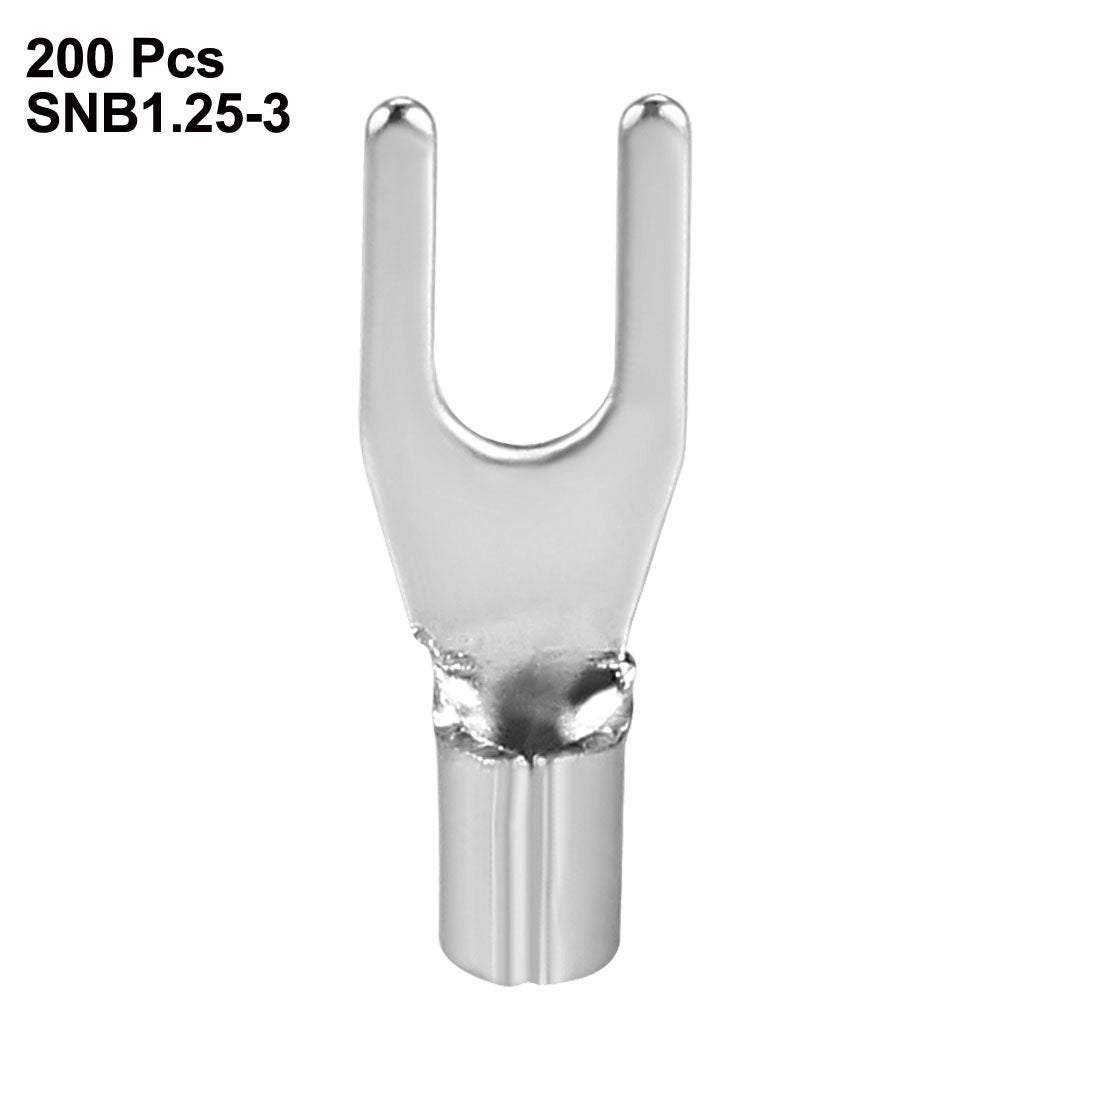 uxcell Uxcell 200x Fork Type Copper Non-Insulated Spade Terminals SNB1.25-3, 22-16 Wire Size, #4 Stud Size